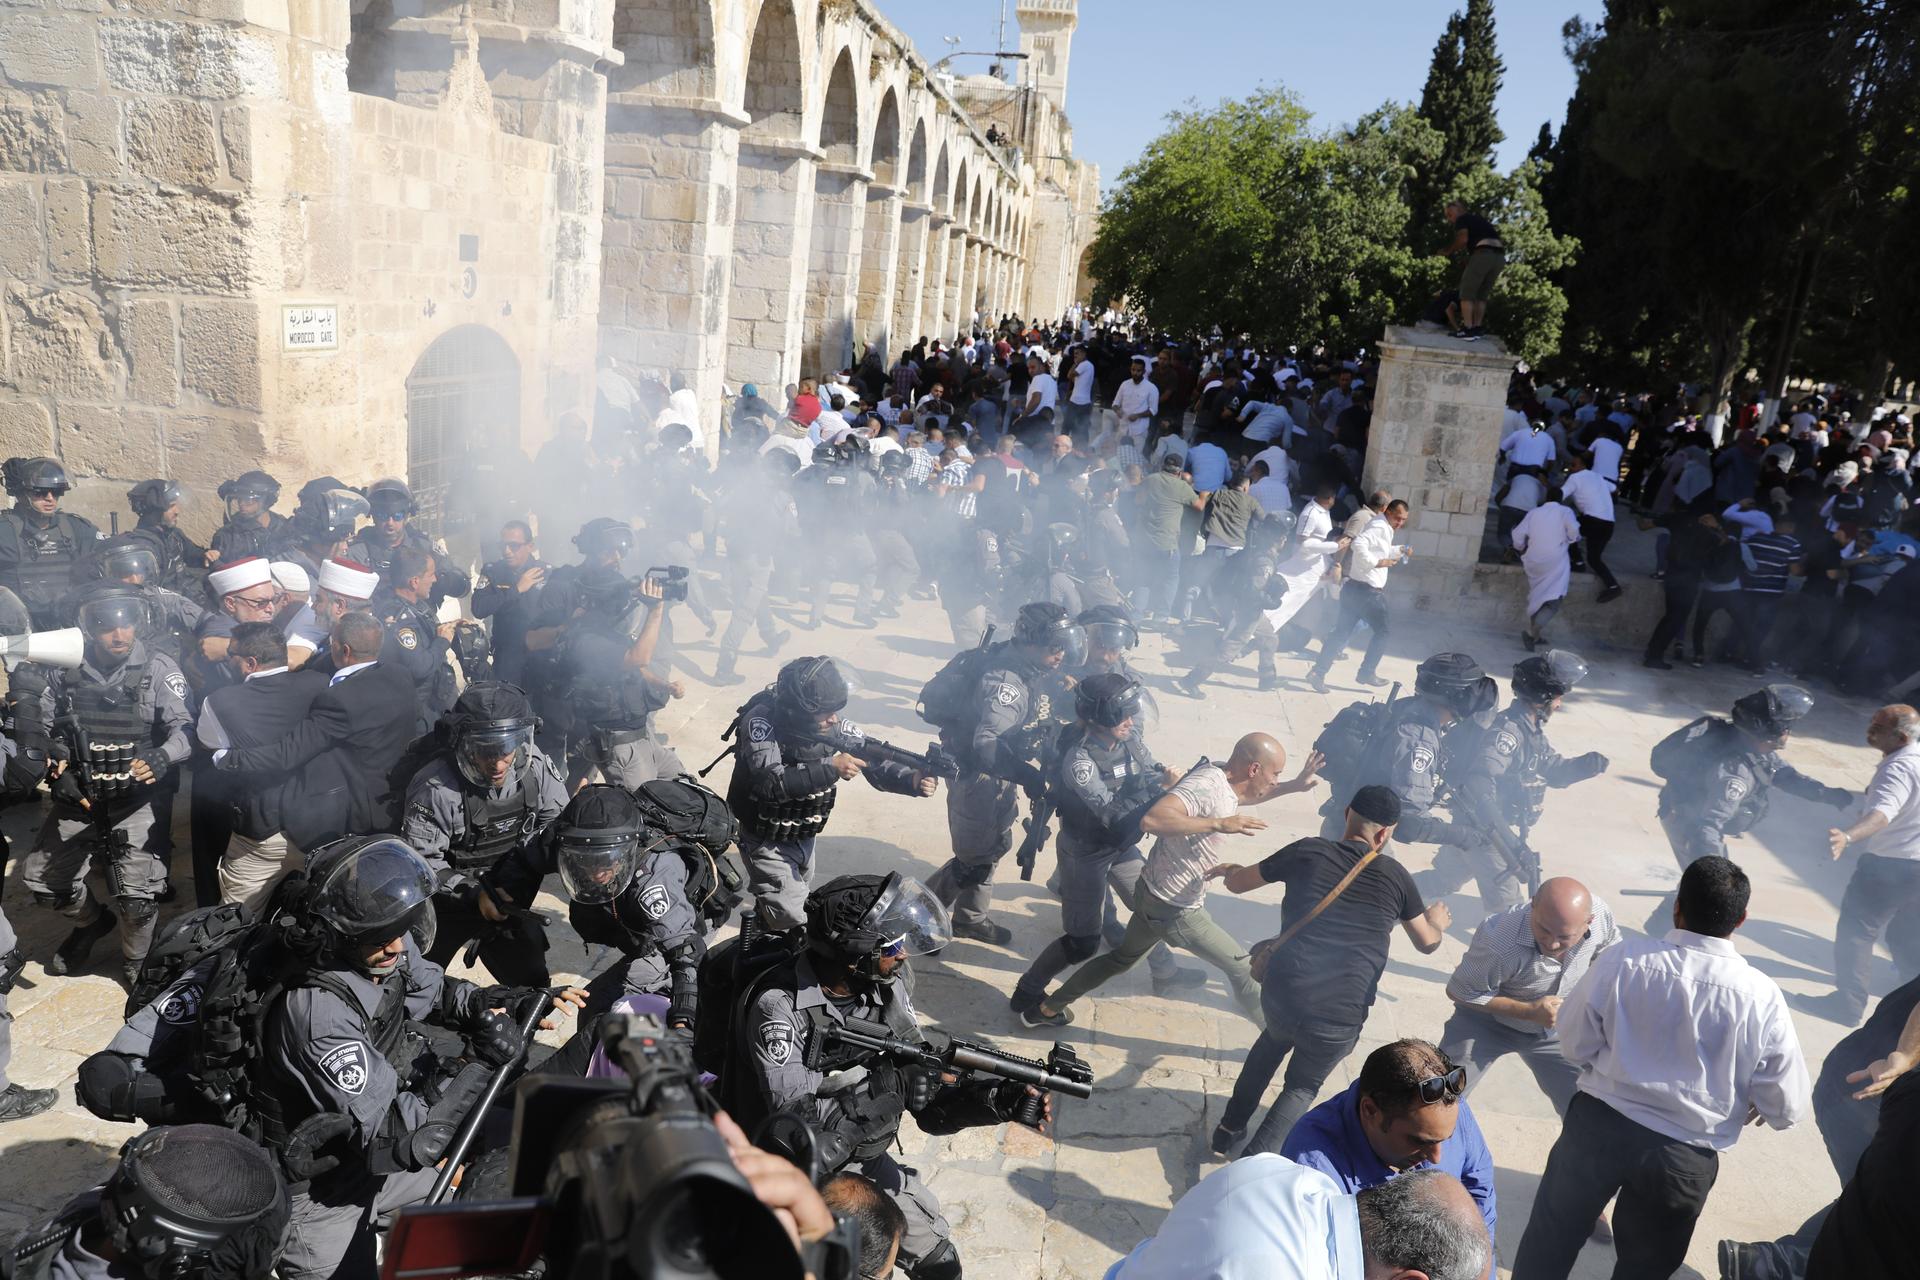 Israeli security forces firing grenades at a crowd of protesters